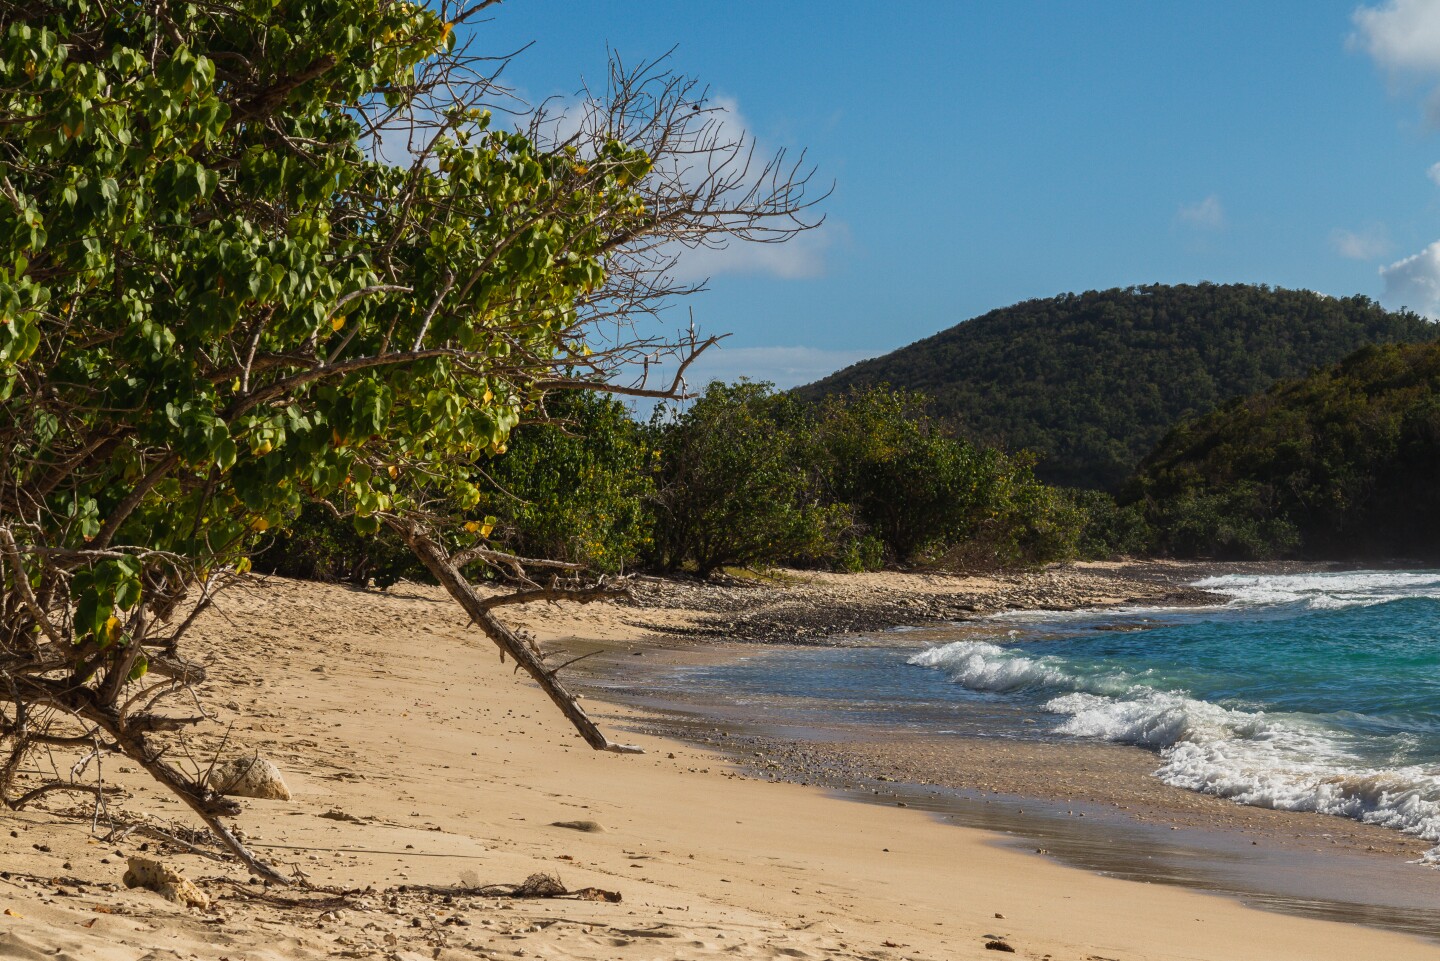 <h2>2. Playa Carlos Rosario</h2> <p><i>Culebra</i></p> <p> This rugged sweep of white sand bookended by forested headlands on the northwest coast of Culebra appears at the end of a dirt path that winds from the parking lot at Flamenco Beach. The 20-minute hike is well worth it: After meandering along the forested fringes of the Reserva Natural de Culebra, you’ll arrive at Playa Carlos Rosario and its prime snorkeling waters, where clouds of reef fish often school in the shallows.</p> <p> If you prefer to arrive by boat, it’s easy enough to find captains offering their services back in Culebra’s main town, Culebra Pueblo (Dewey). The trip takes about 20 minutes.</p>